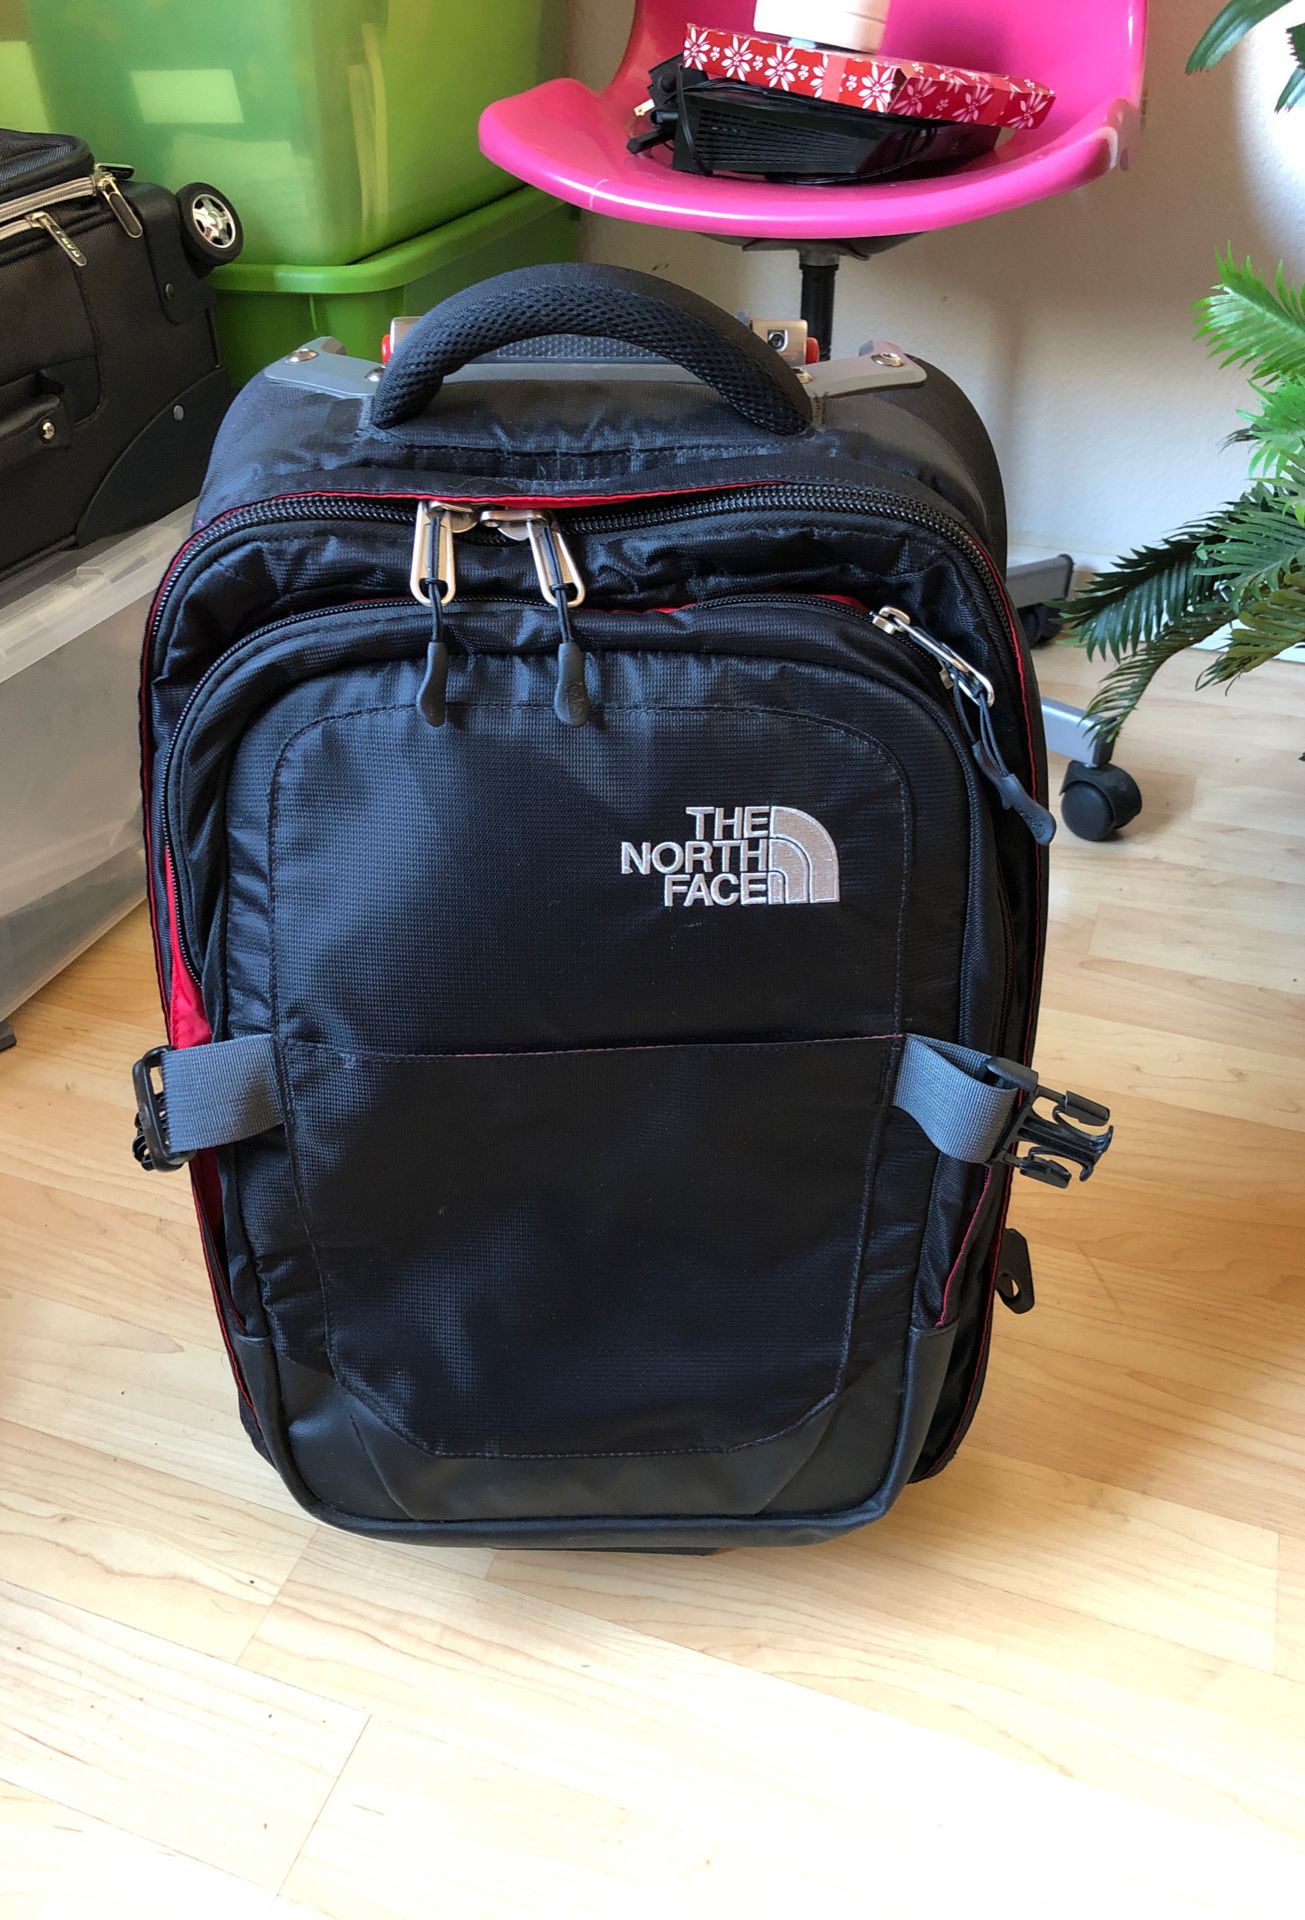 North face luggage